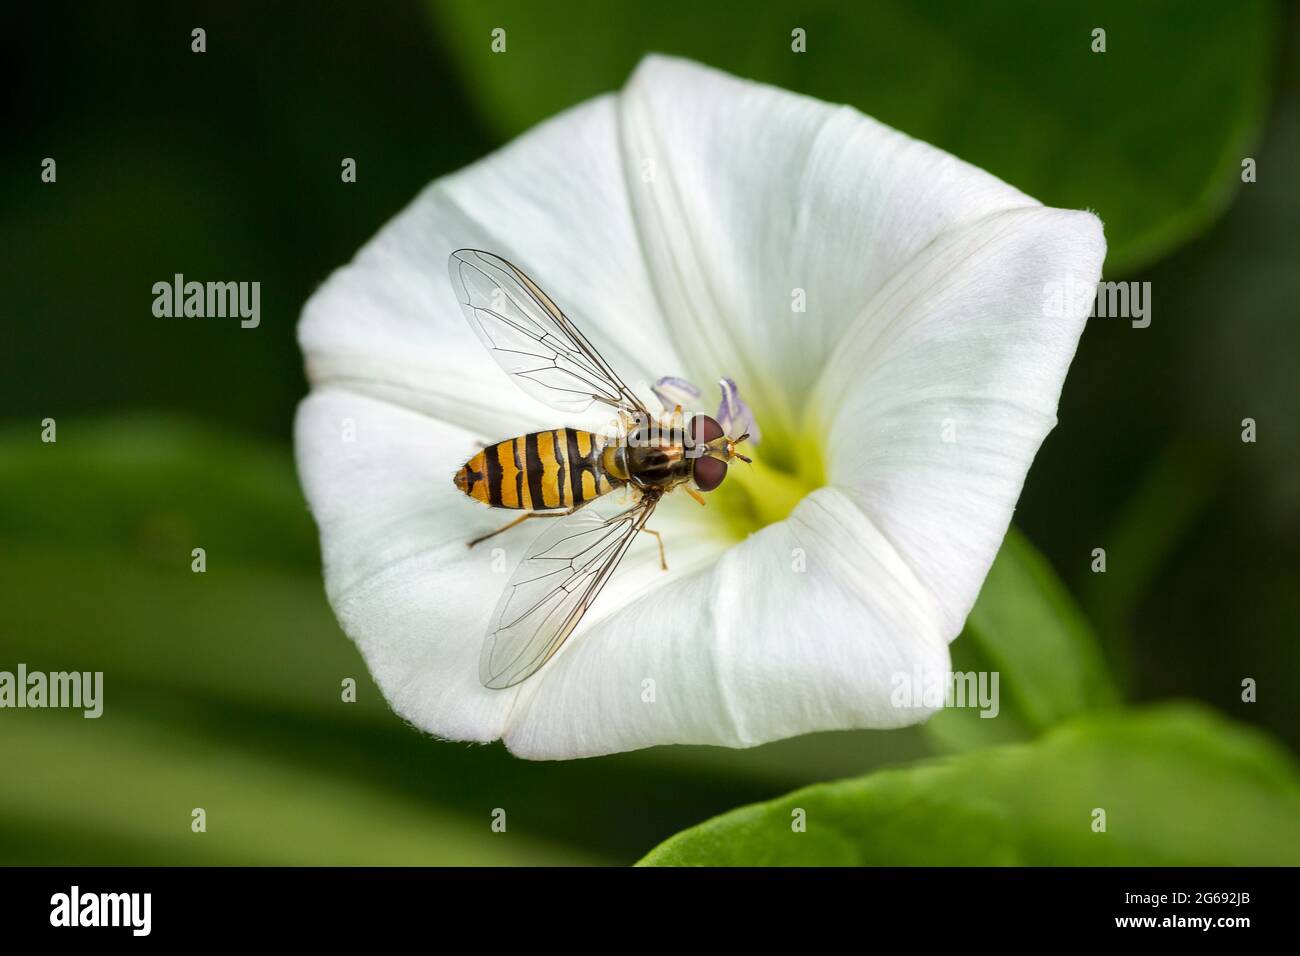 Hoverfly on hedge bindweed wasp like yellow and black markings and reddish brown eyes feeding on nectar from trumpet shaped white wild flower Stock Photo